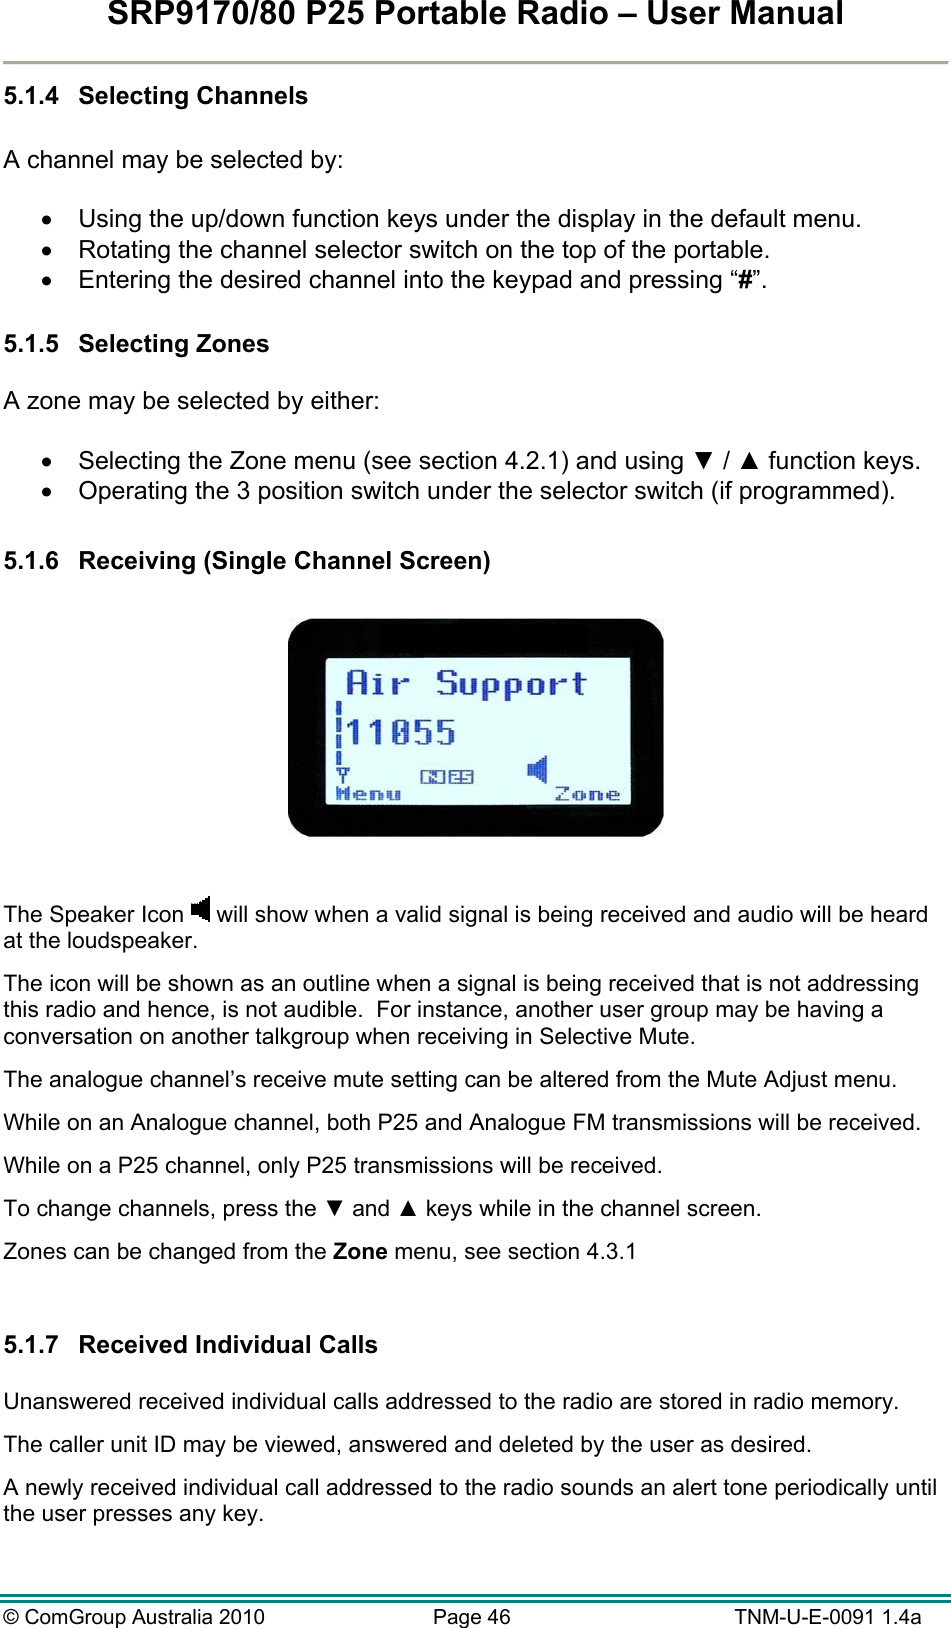 SRP9170/80 P25 Portable Radio – User Manual  © ComGroup Australia 2010  Page 46   TNM-U-E-0091 1.4a 5.1.4 Selecting Channels  A channel may be selected by:    Using the up/down function keys under the display in the default menu.   Rotating the channel selector switch on the top of the portable.   Entering the desired channel into the keypad and pressing “#”.  5.1.5 Selecting Zones  A zone may be selected by either:    Selecting the Zone menu (see section 4.2.1) and using ▼ / ▲ function keys.   Operating the 3 position switch under the selector switch (if programmed).  5.1.6  Receiving (Single Channel Screen)    The Speaker Icon   will show when a valid signal is being received and audio will be heard at the loudspeaker.   The icon will be shown as an outline when a signal is being received that is not addressing this radio and hence, is not audible.  For instance, another user group may be having a conversation on another talkgroup when receiving in Selective Mute. The analogue channel’s receive mute setting can be altered from the Mute Adjust menu. While on an Analogue channel, both P25 and Analogue FM transmissions will be received. While on a P25 channel, only P25 transmissions will be received. To change channels, press the ▼ and ▲ keys while in the channel screen. Zones can be changed from the Zone menu, see section 4.3.1  5.1.7  Received Individual Calls   Unanswered received individual calls addressed to the radio are stored in radio memory.   The caller unit ID may be viewed, answered and deleted by the user as desired.   A newly received individual call addressed to the radio sounds an alert tone periodically until the user presses any key.  